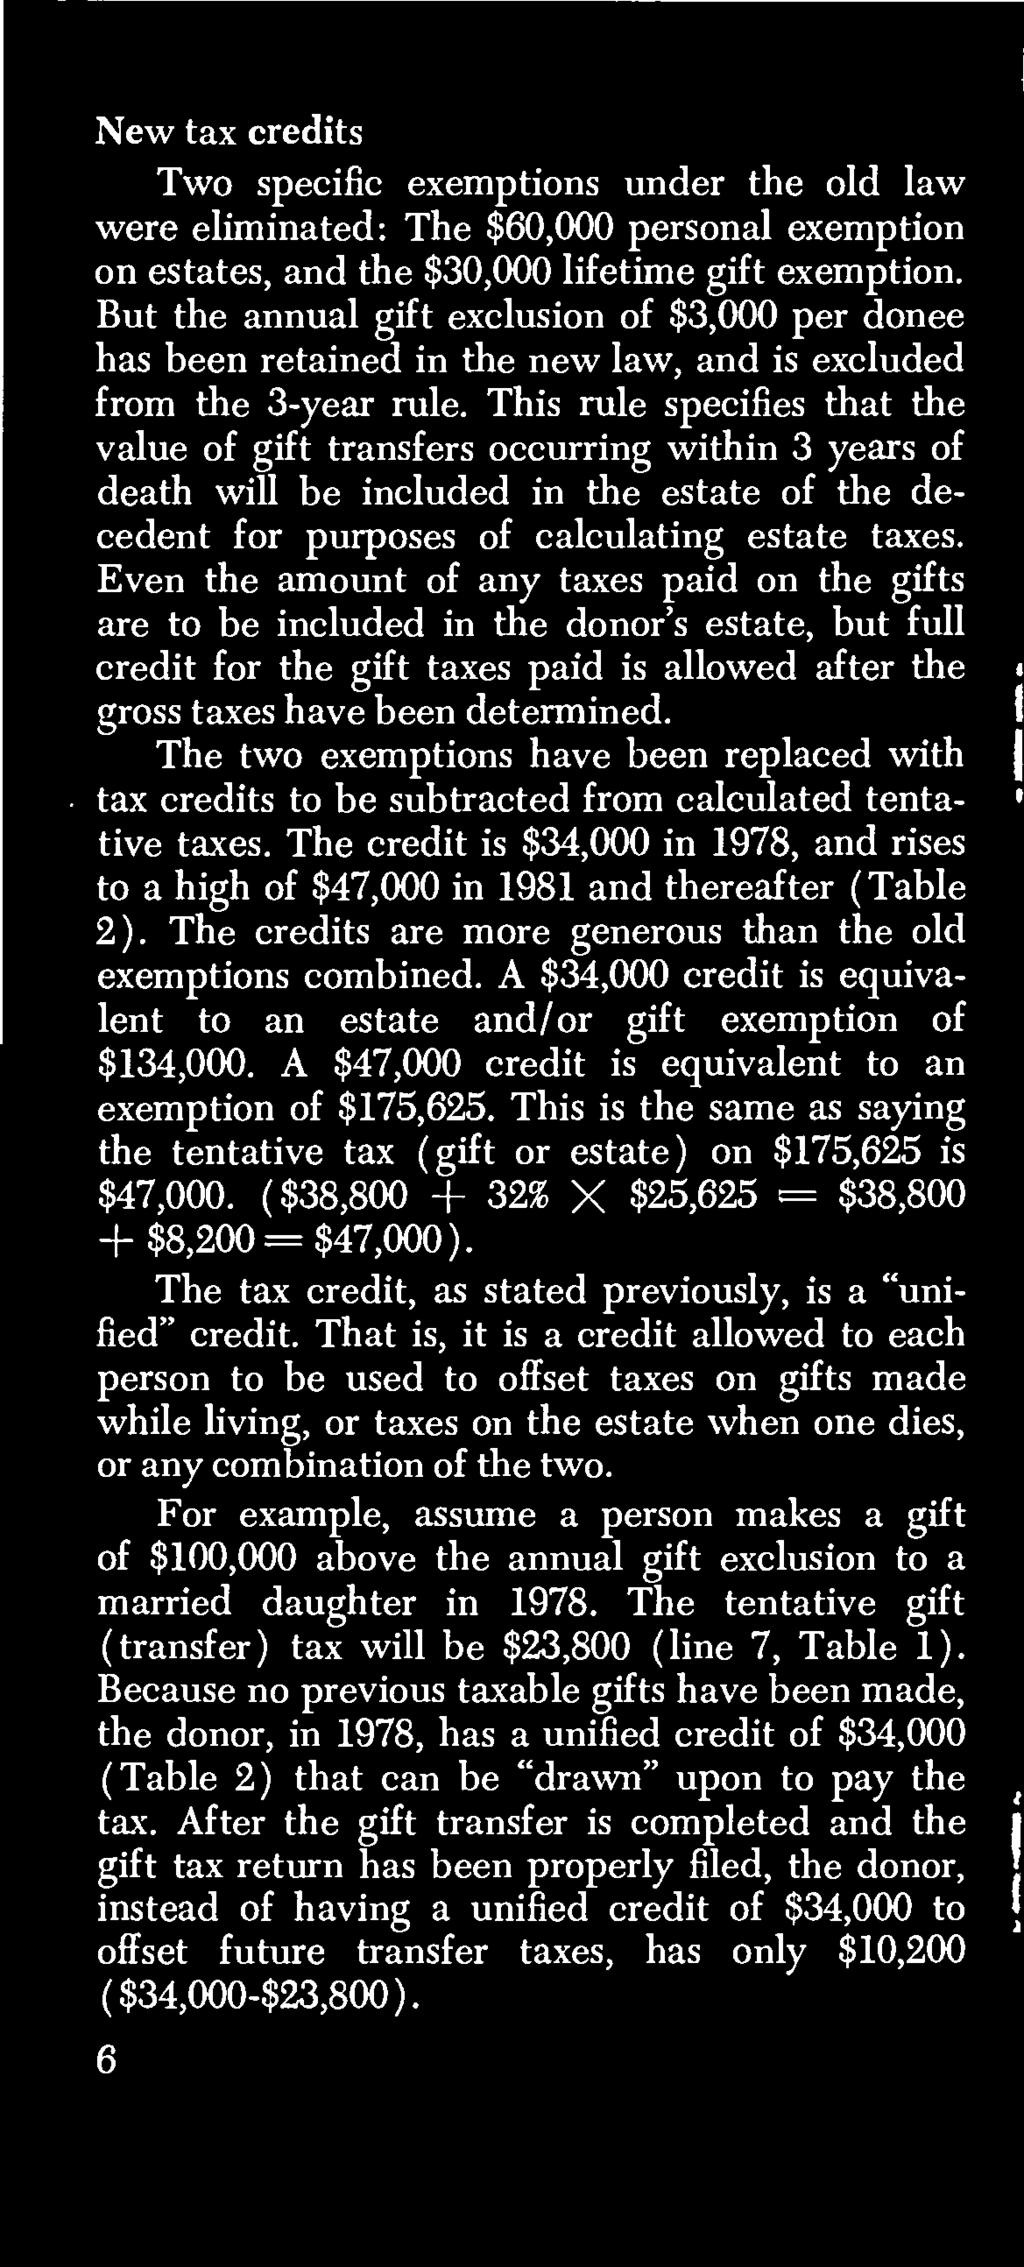 The two exemptions have been replaced with tax credits to be subtracted from calculated tentative taxes. The credit is $34,000 in 1978, and rises to a high of $47,000 in 1981 and thereafter (Table 2).